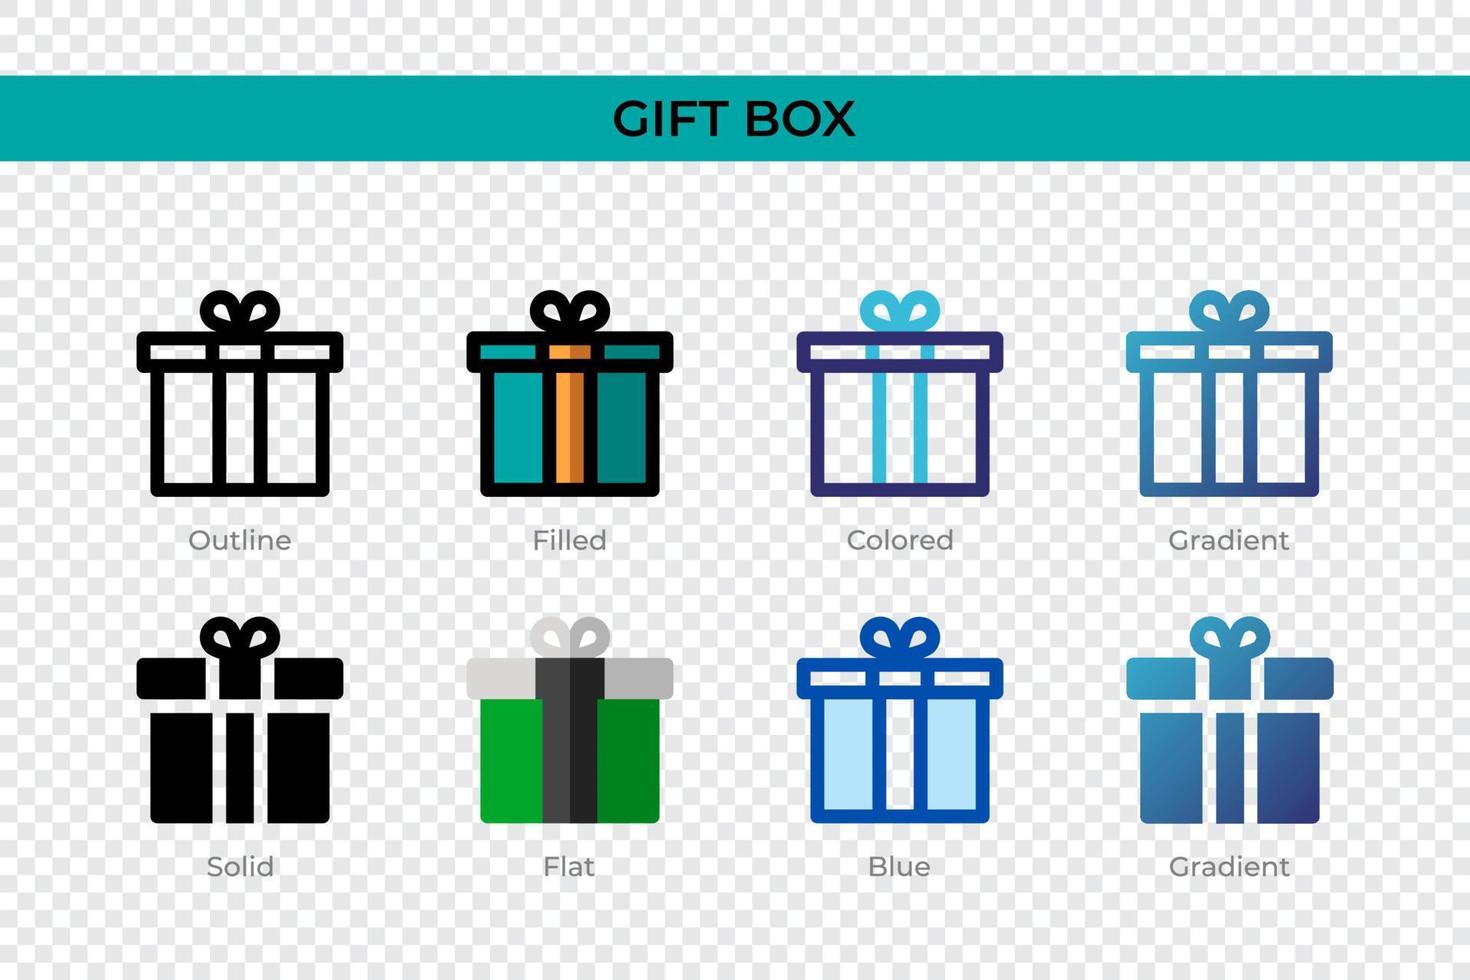 Gift Box icon in different style. Gift Box vector icons designed in outline, solid, colored, filled, gradient, and flat style. Symbol, logo illustration. Vector illustration